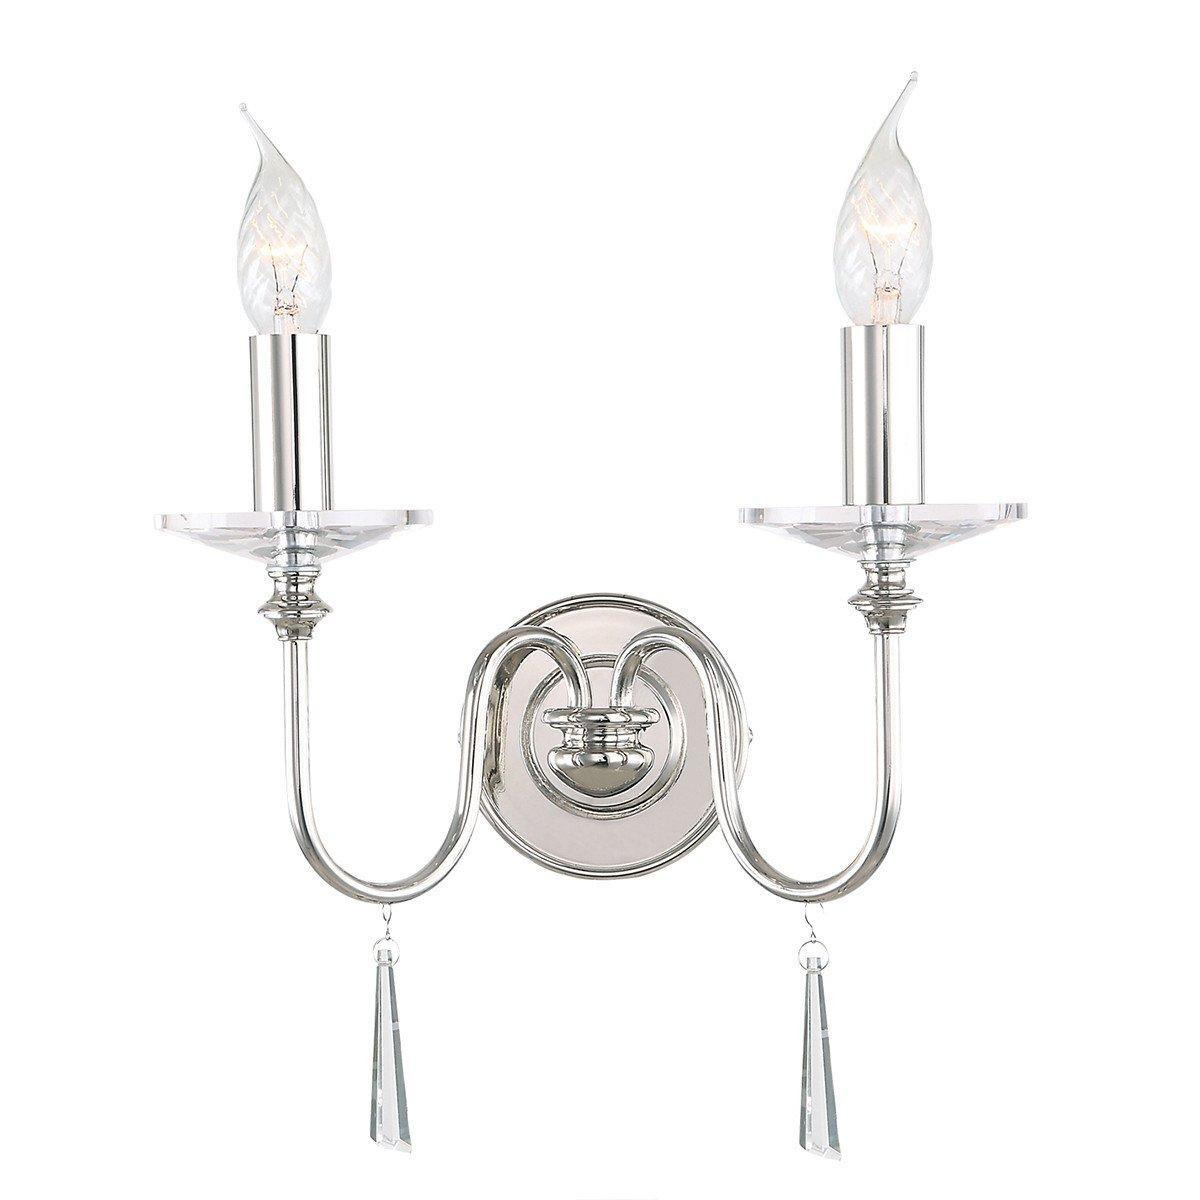 Finsbury Park 2 Light Indoor Candle Wall Light Polished Nickel E14 - image 1